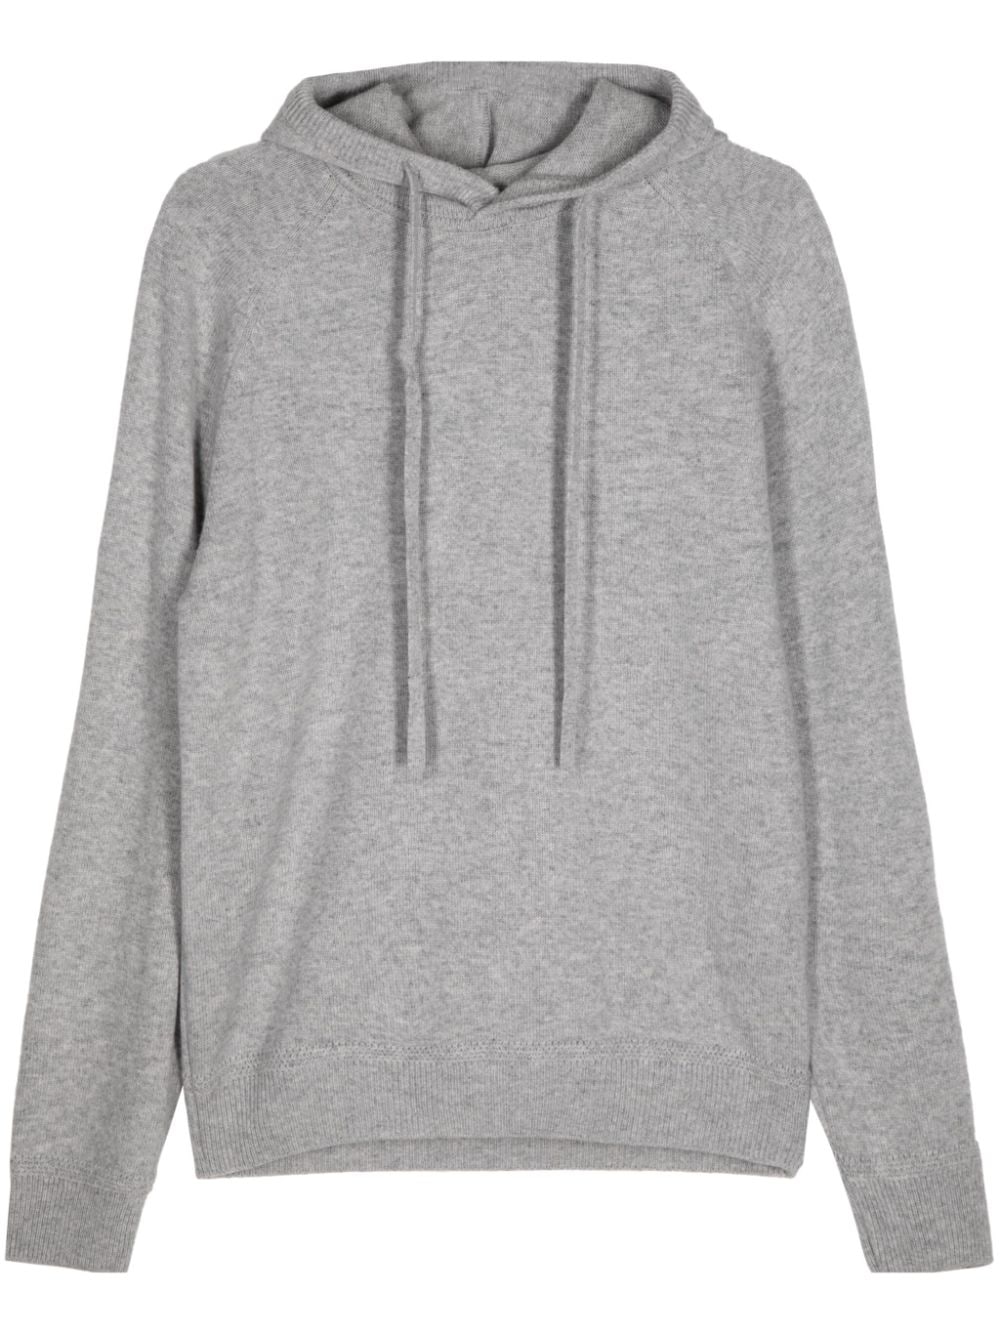 Man On The Boon. Drawstring Cashmere Hoodie In Grey